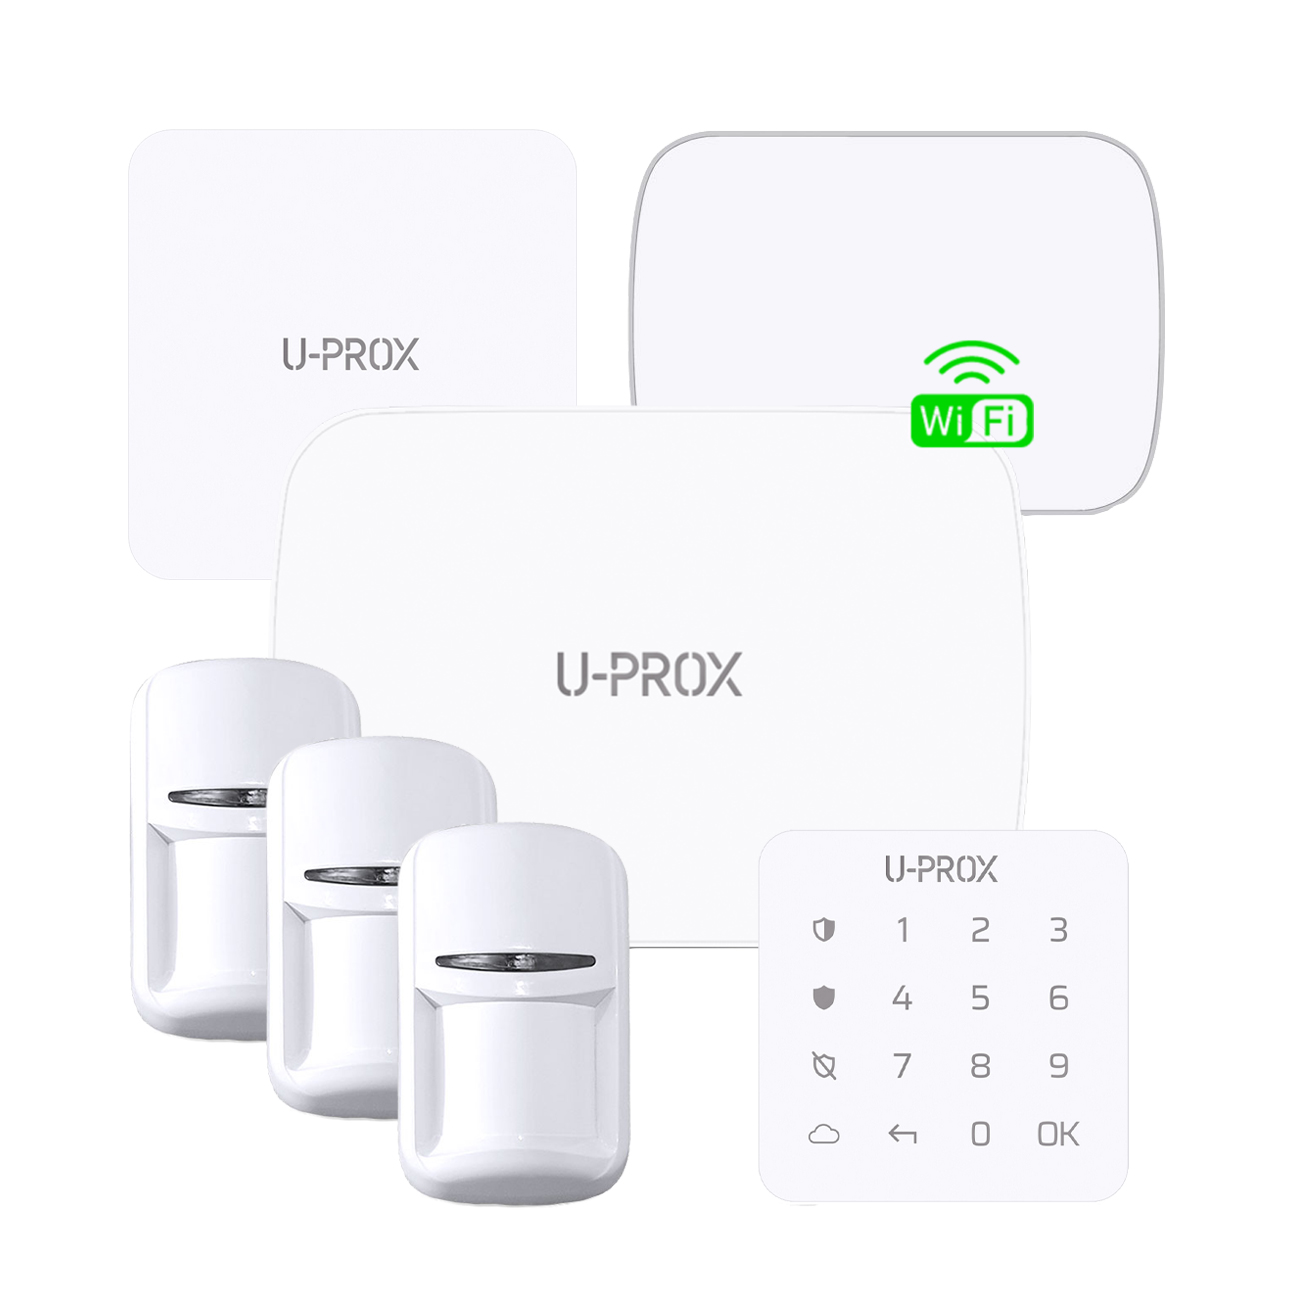 U-PROX WIRELESS MPX LE ALARM KIT INCLUDES 1 x PANEL WITH 4G + WI-FI + LAN COMMS LI-ION BACKUP BATTERY 1 x PSU 3 x PIR 1 x G1 KEYPAD 1 x SIREN 1 x OUTDOOR SIREN ALL DEVICES COME WITH LI-ION BATTERY